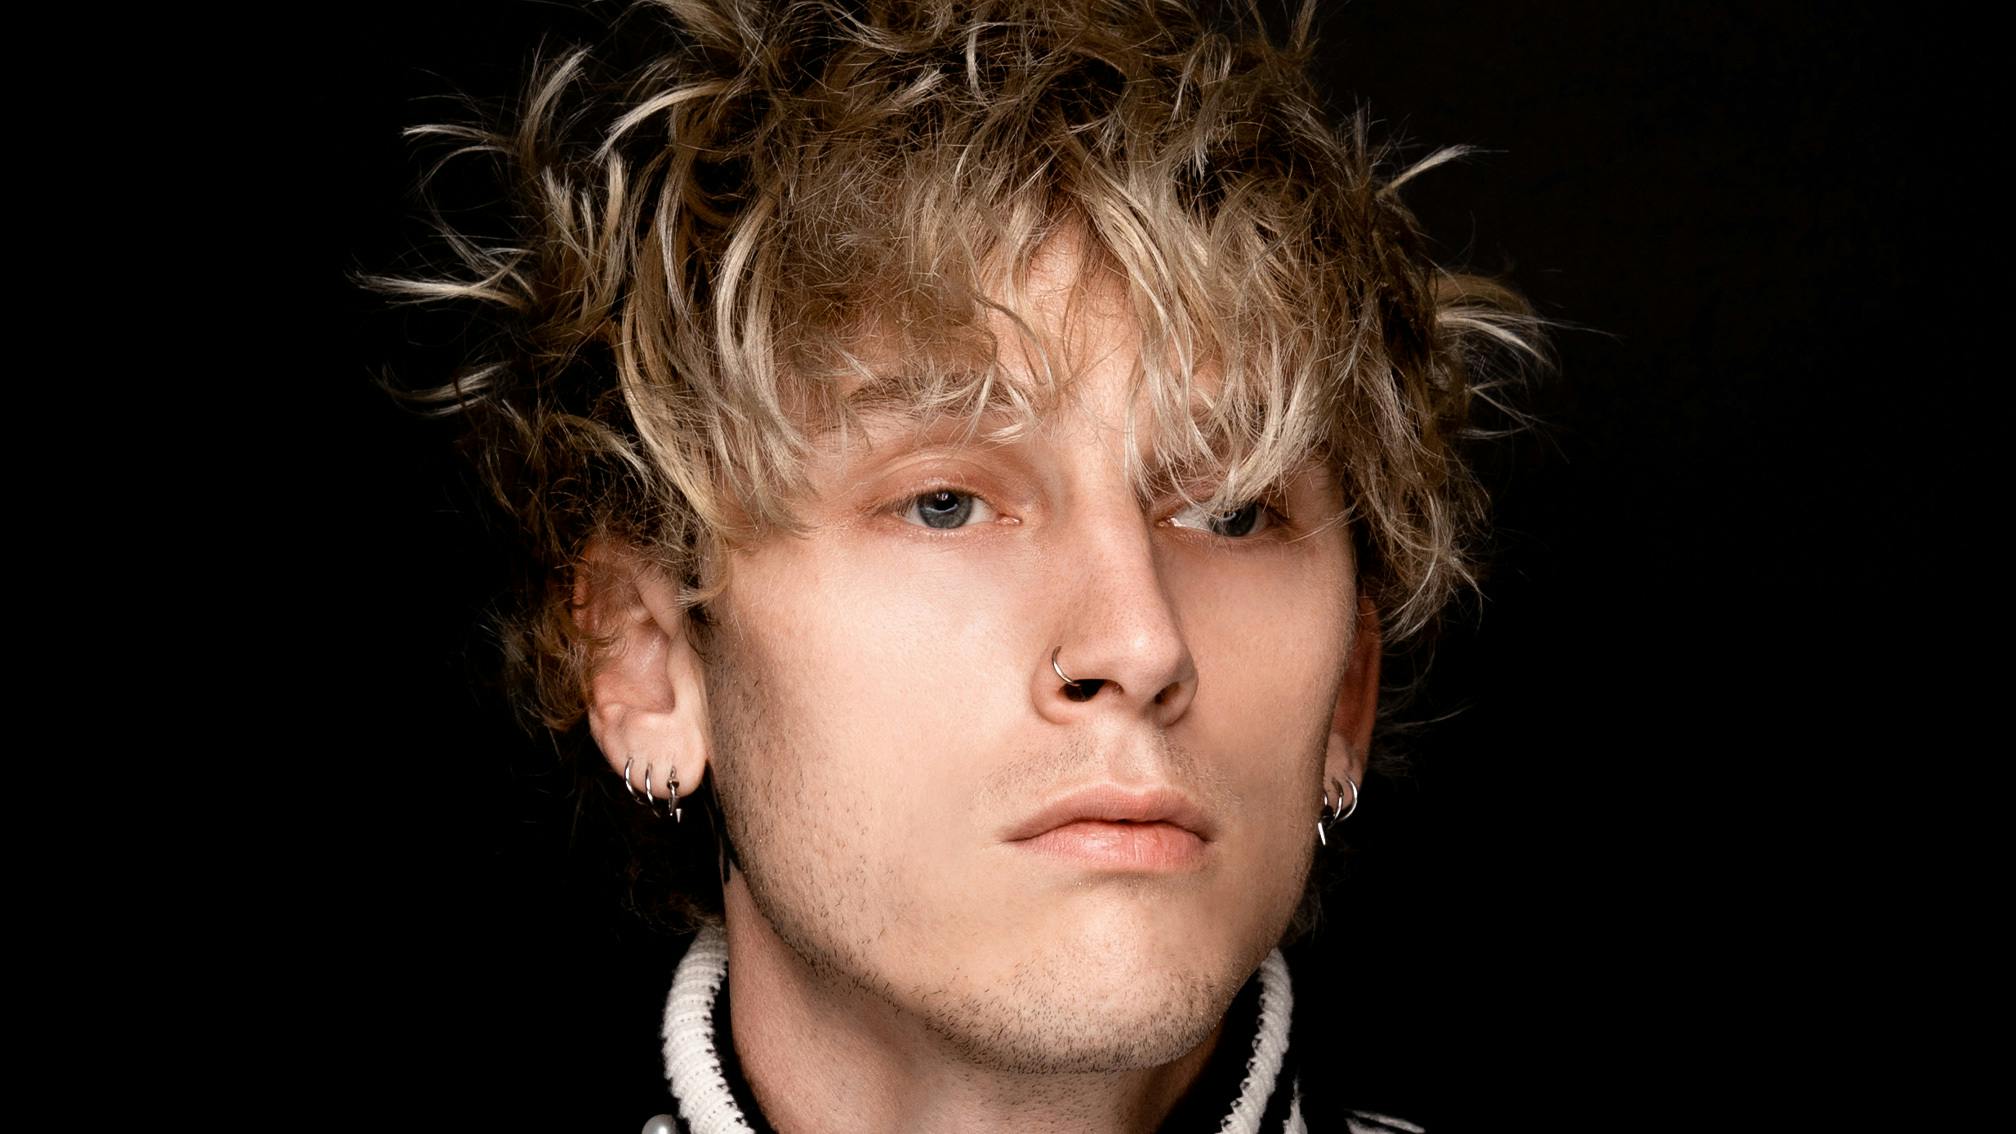 Machine Gun Kelly Opens Up About Going To Therapy To Address Drug Abuse